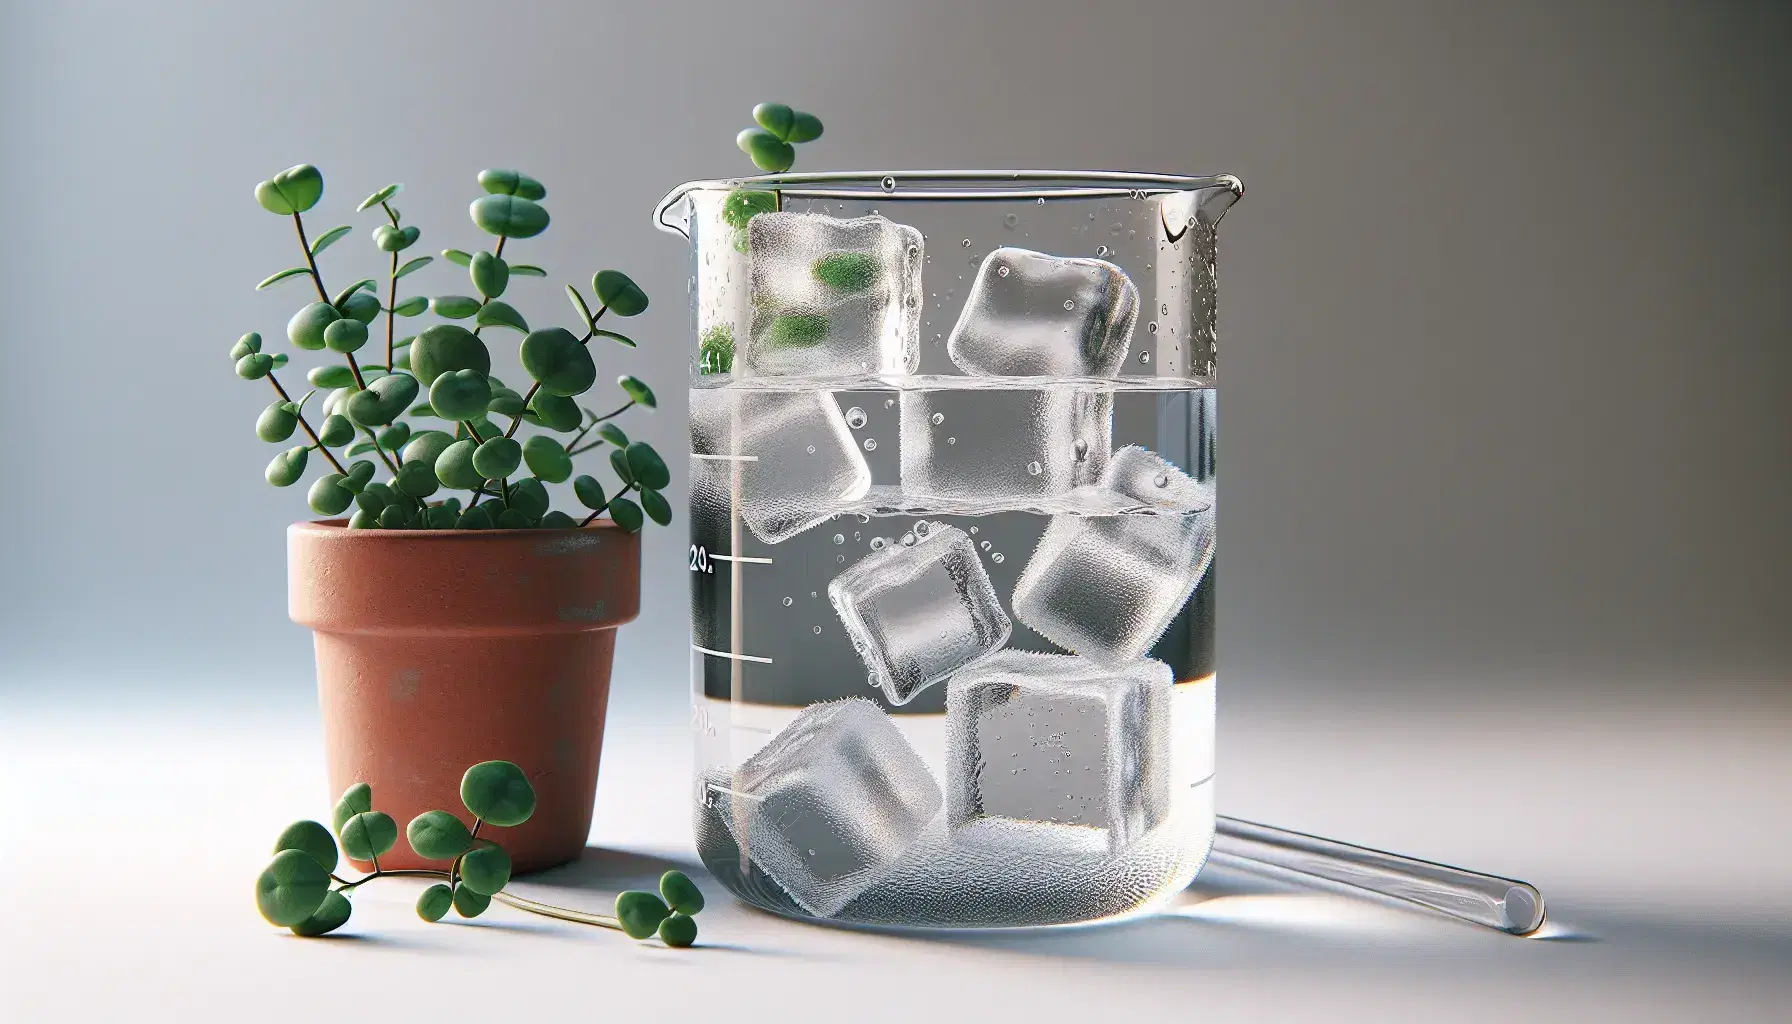 Glass beaker with transparent water and floating ice cubes, green plant in terracotta pot on background, glass rod for stirring.